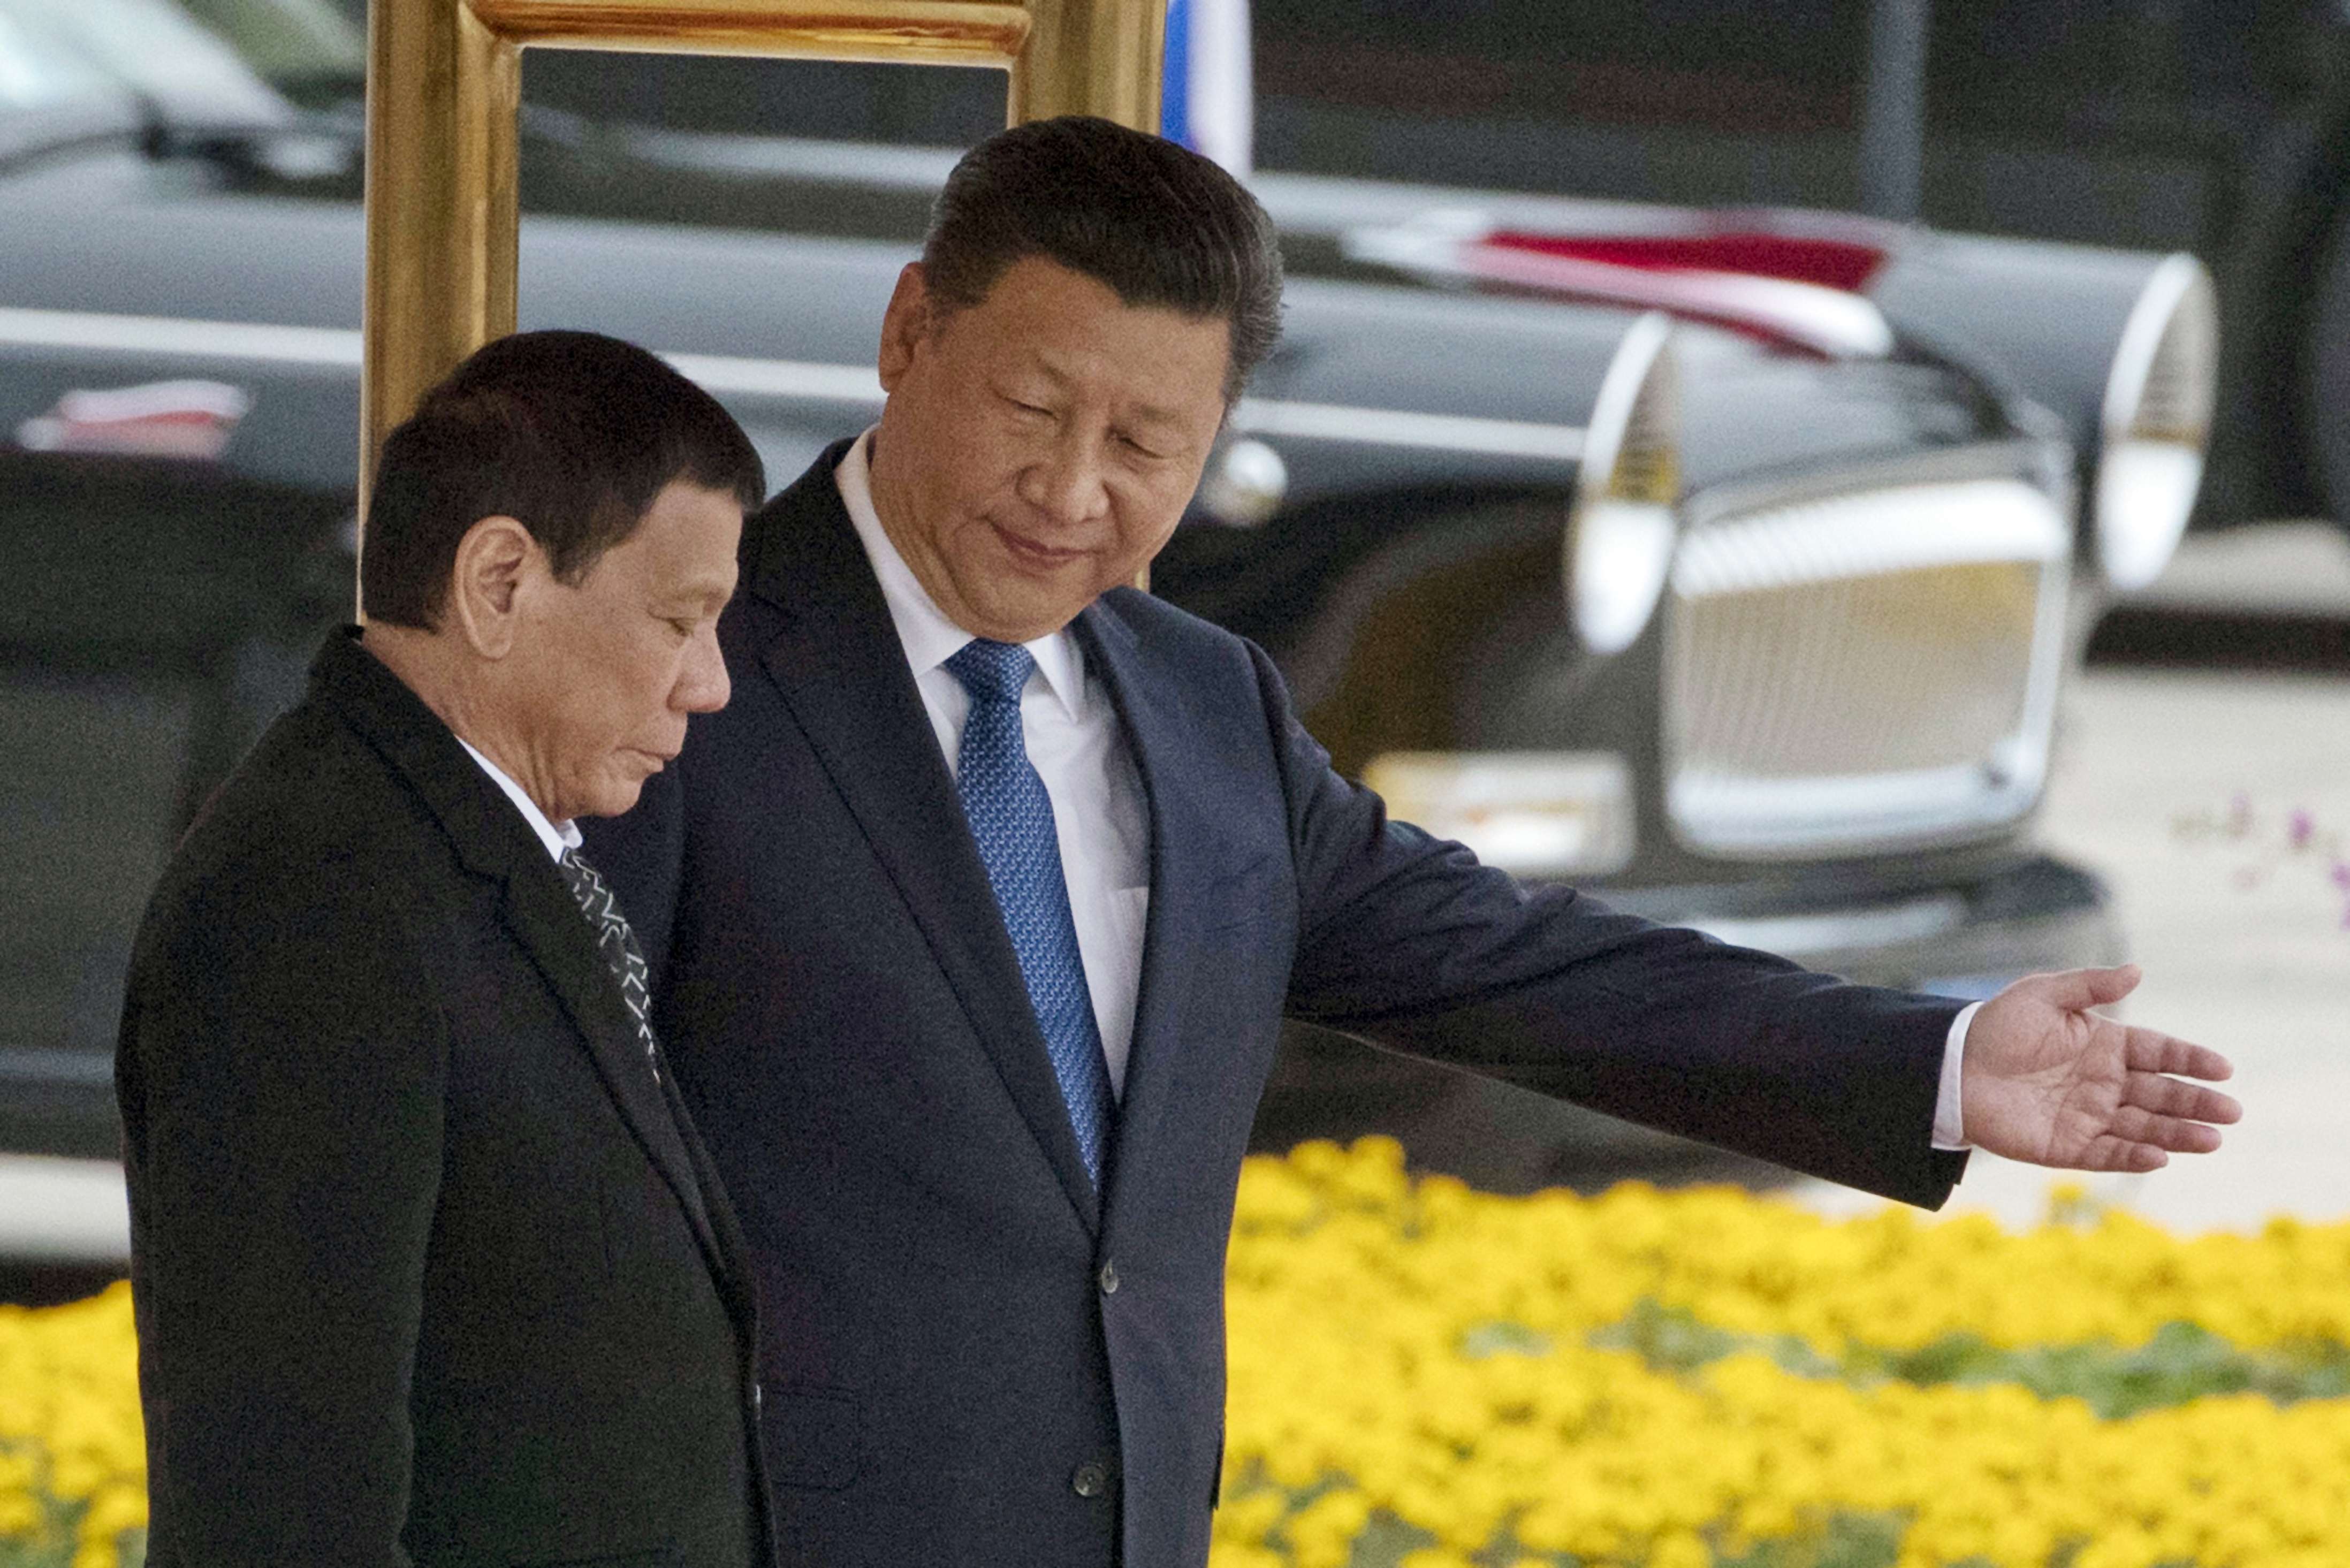 President Xi Jinping leads Philippine President Rodrigo Duterte during a welcome ceremony outside the Great Hall of the People in Beijing, last October 20. The question is whether other Asian countries traditionally allied with the US will also now tilt towards China. Photo: AP